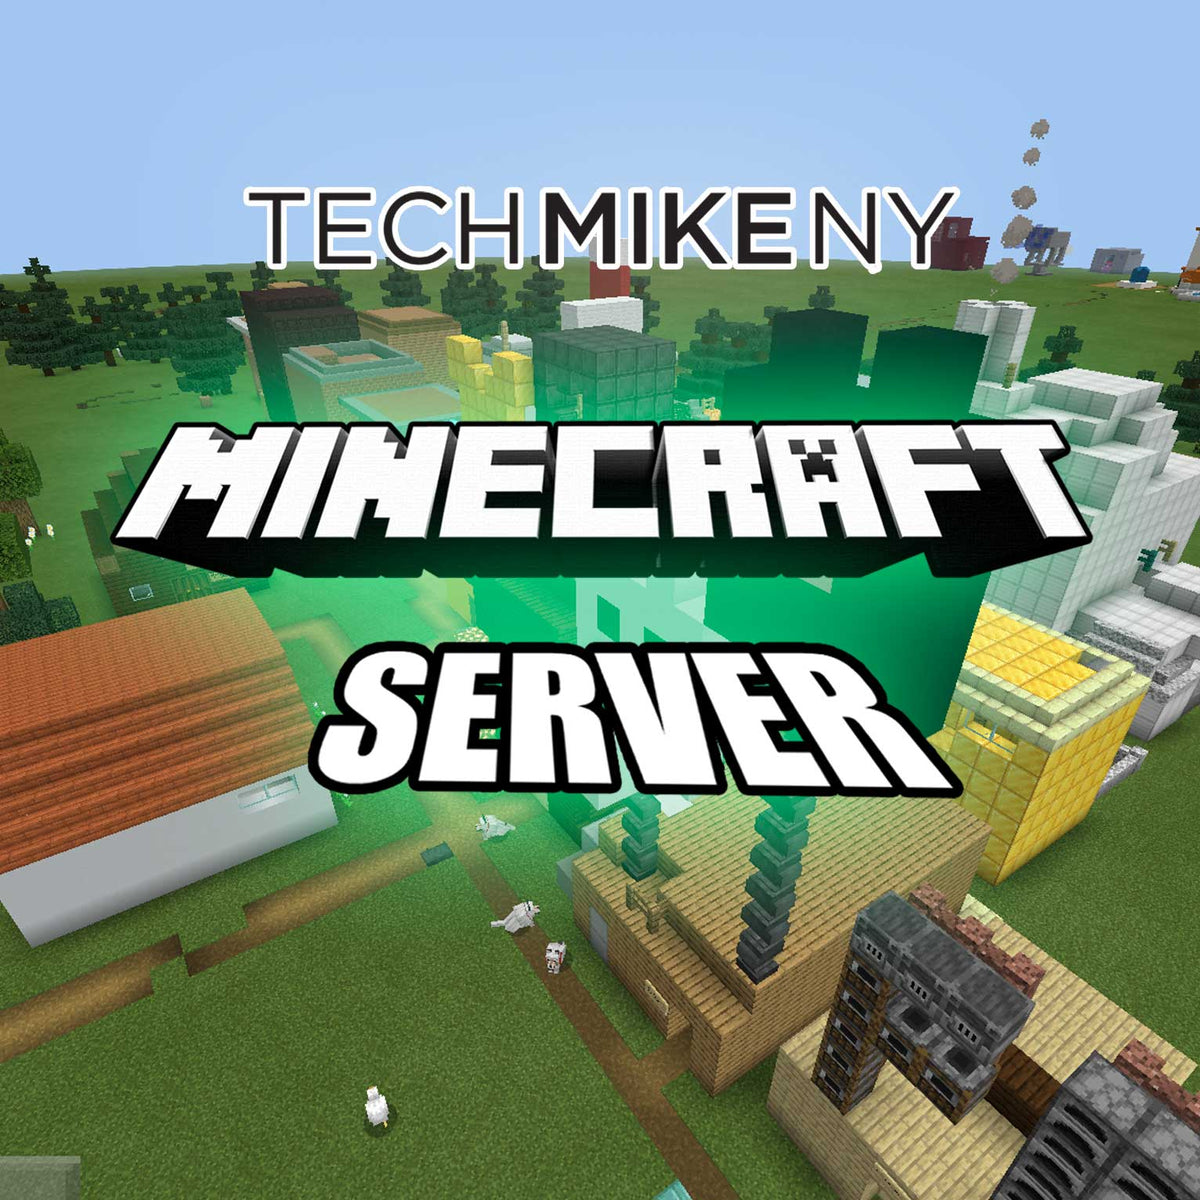 5 best servers for Minecraft Pocket Edition in May 2021